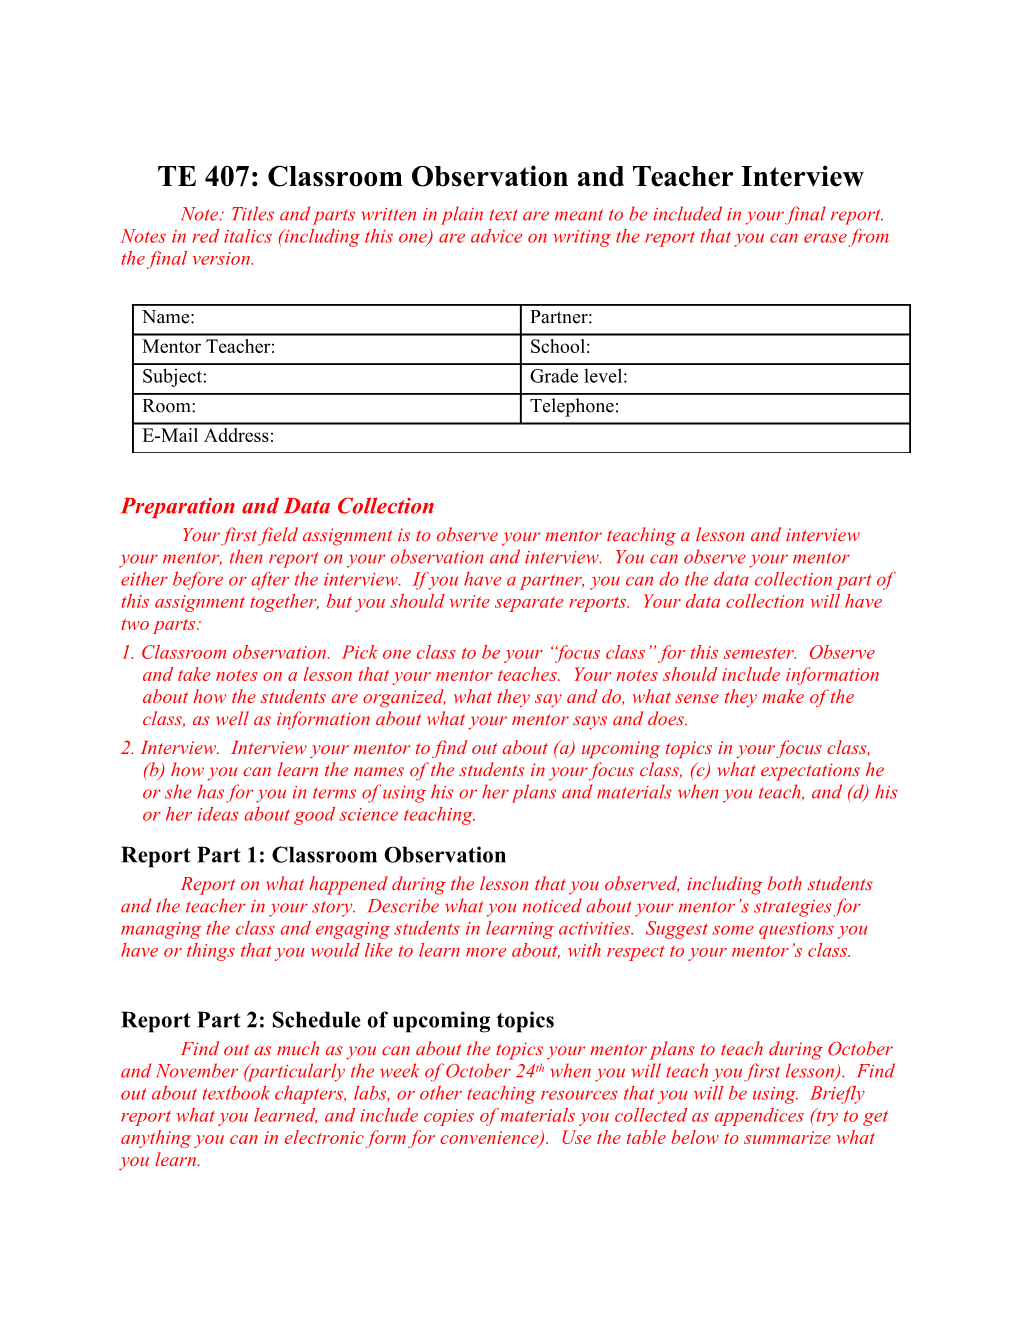 TE 407: Classroom Observation and Teacher Interview